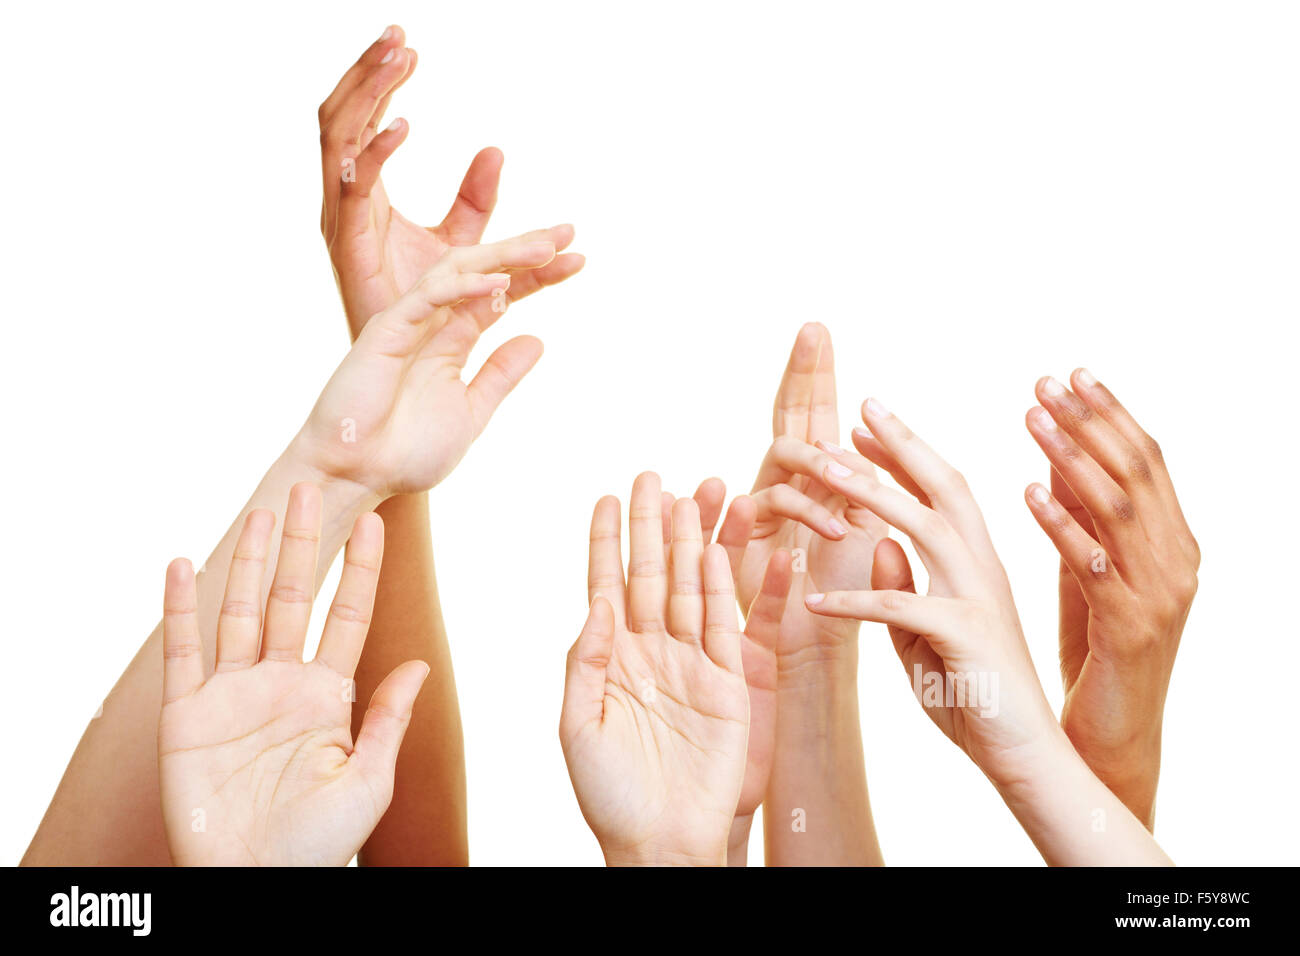 Many desperate hands reaching into the air Stock Photo